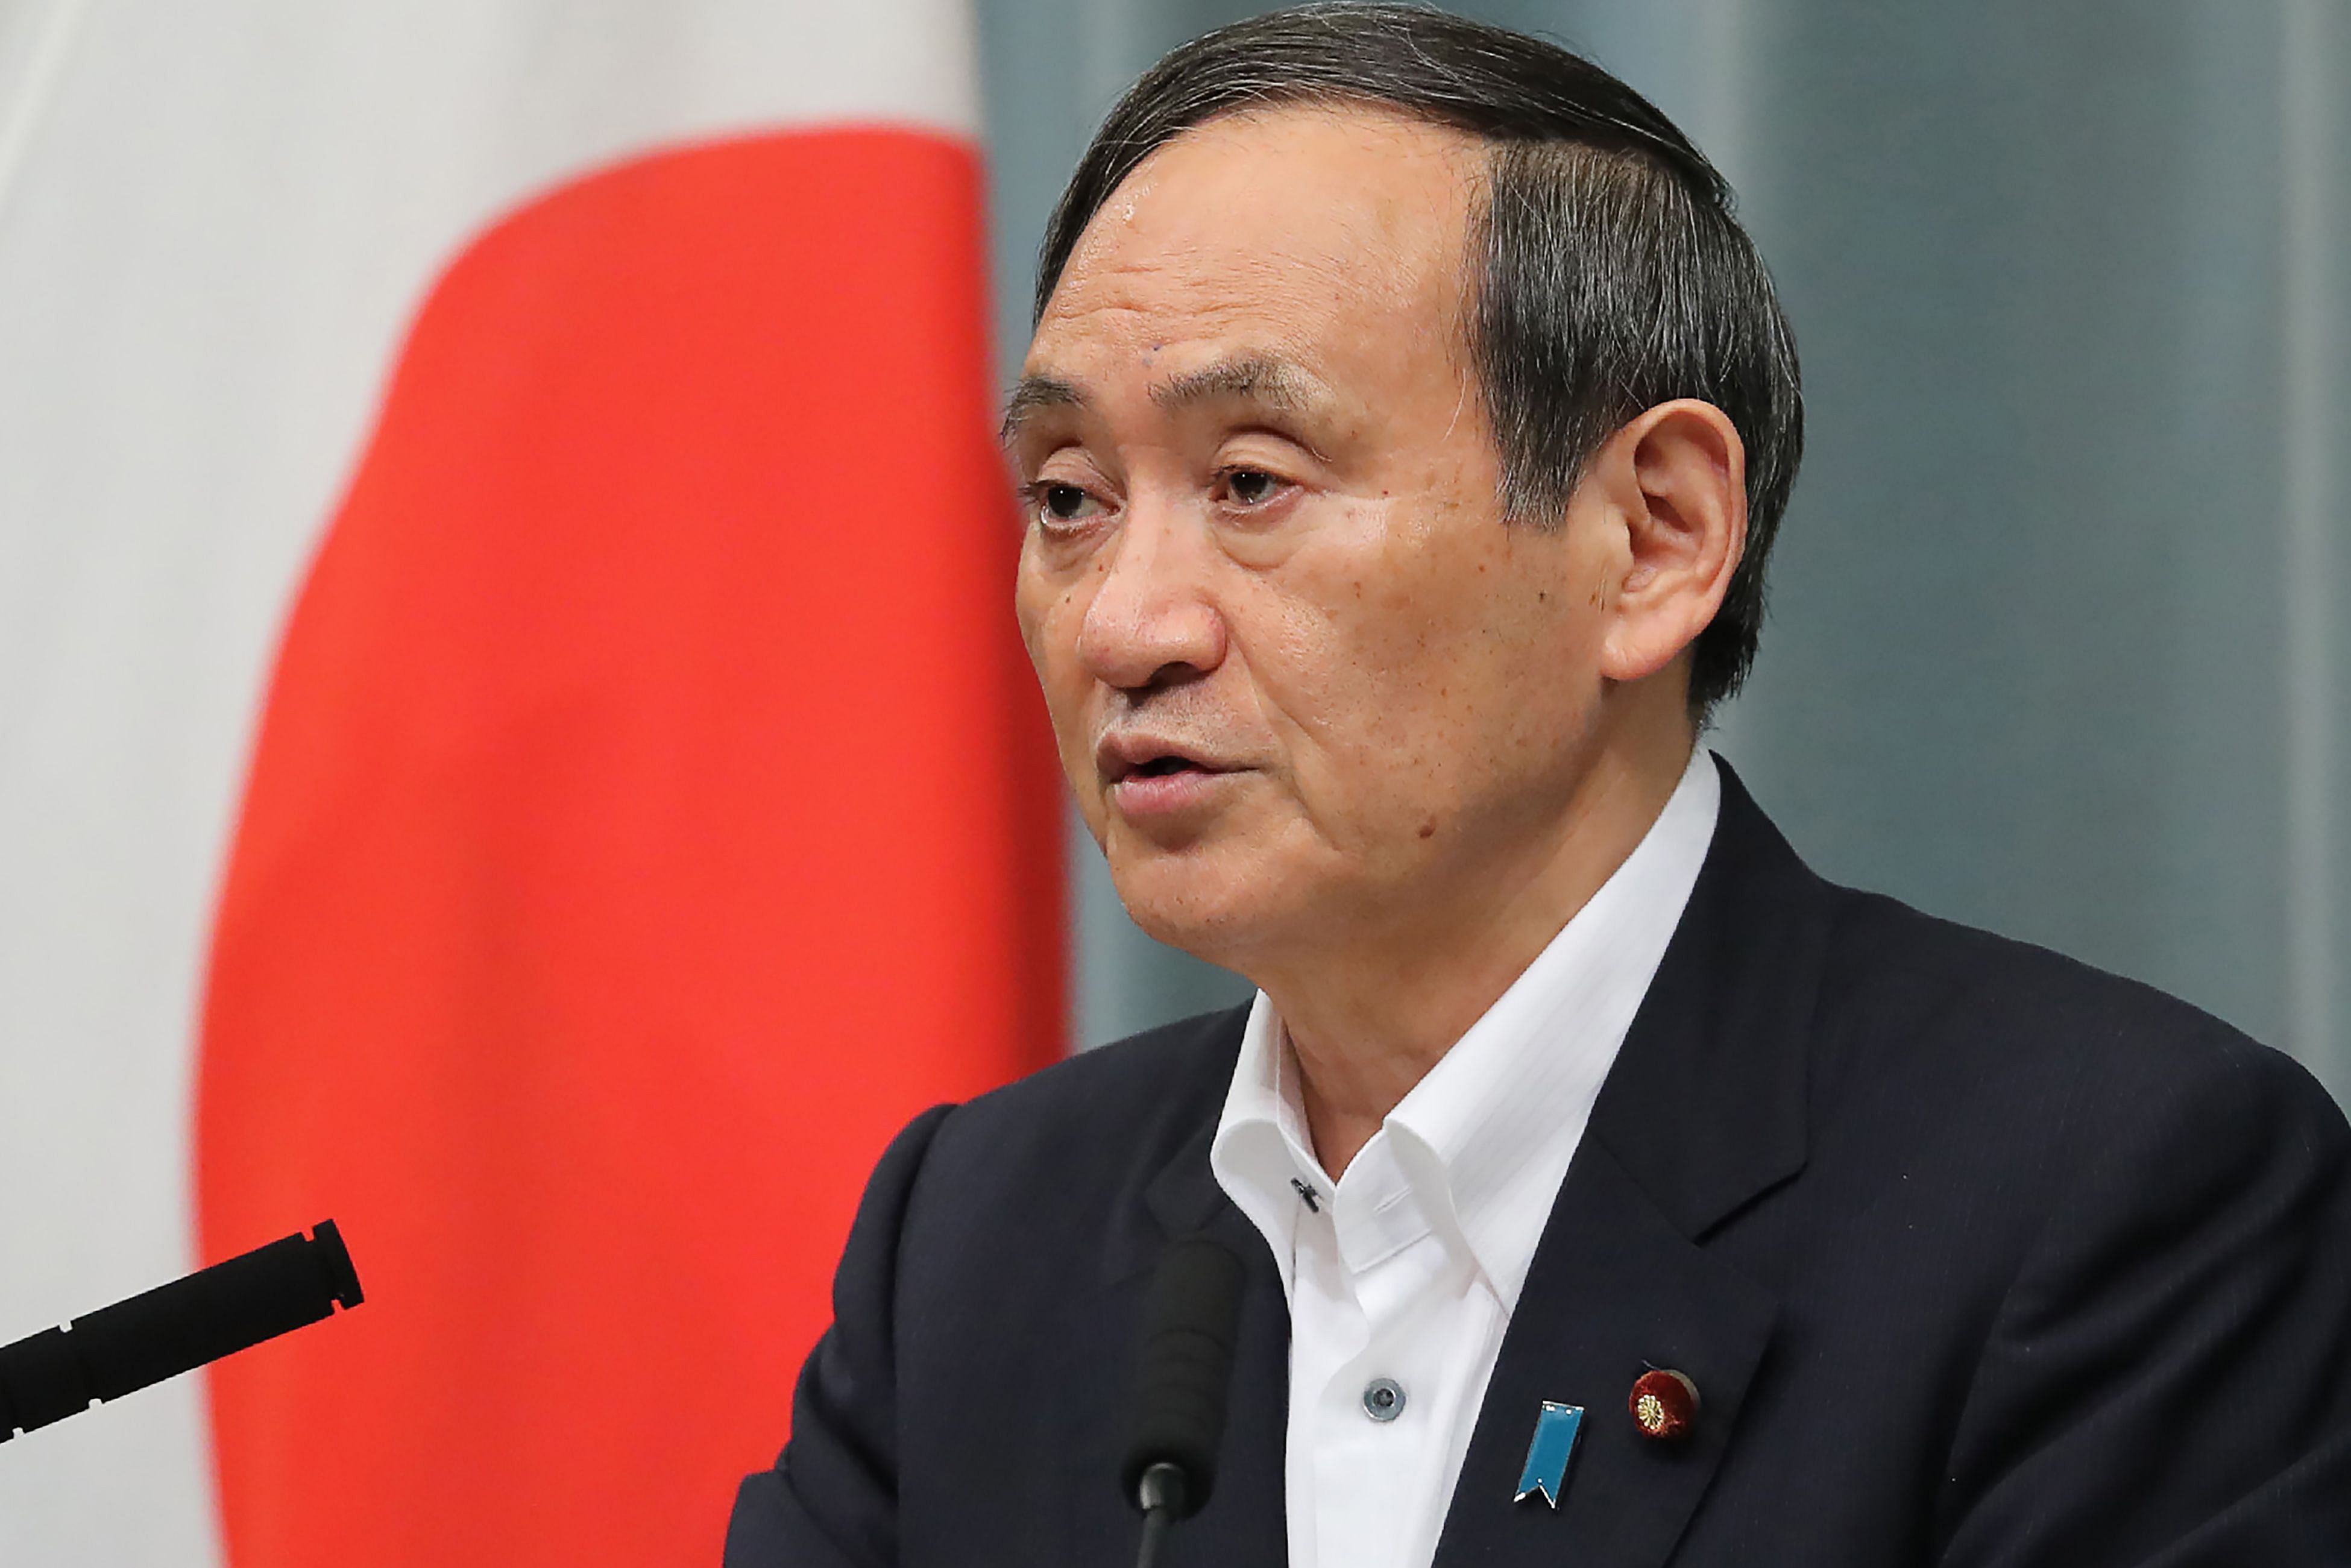 Japan's Cabinet Secretary Yoshihide Suga speaks during a press conference, after 6.8-magnitude earthquake hit the northwest of Japan, at the prime minister's official residence in Tokyo. (AFP Photo)